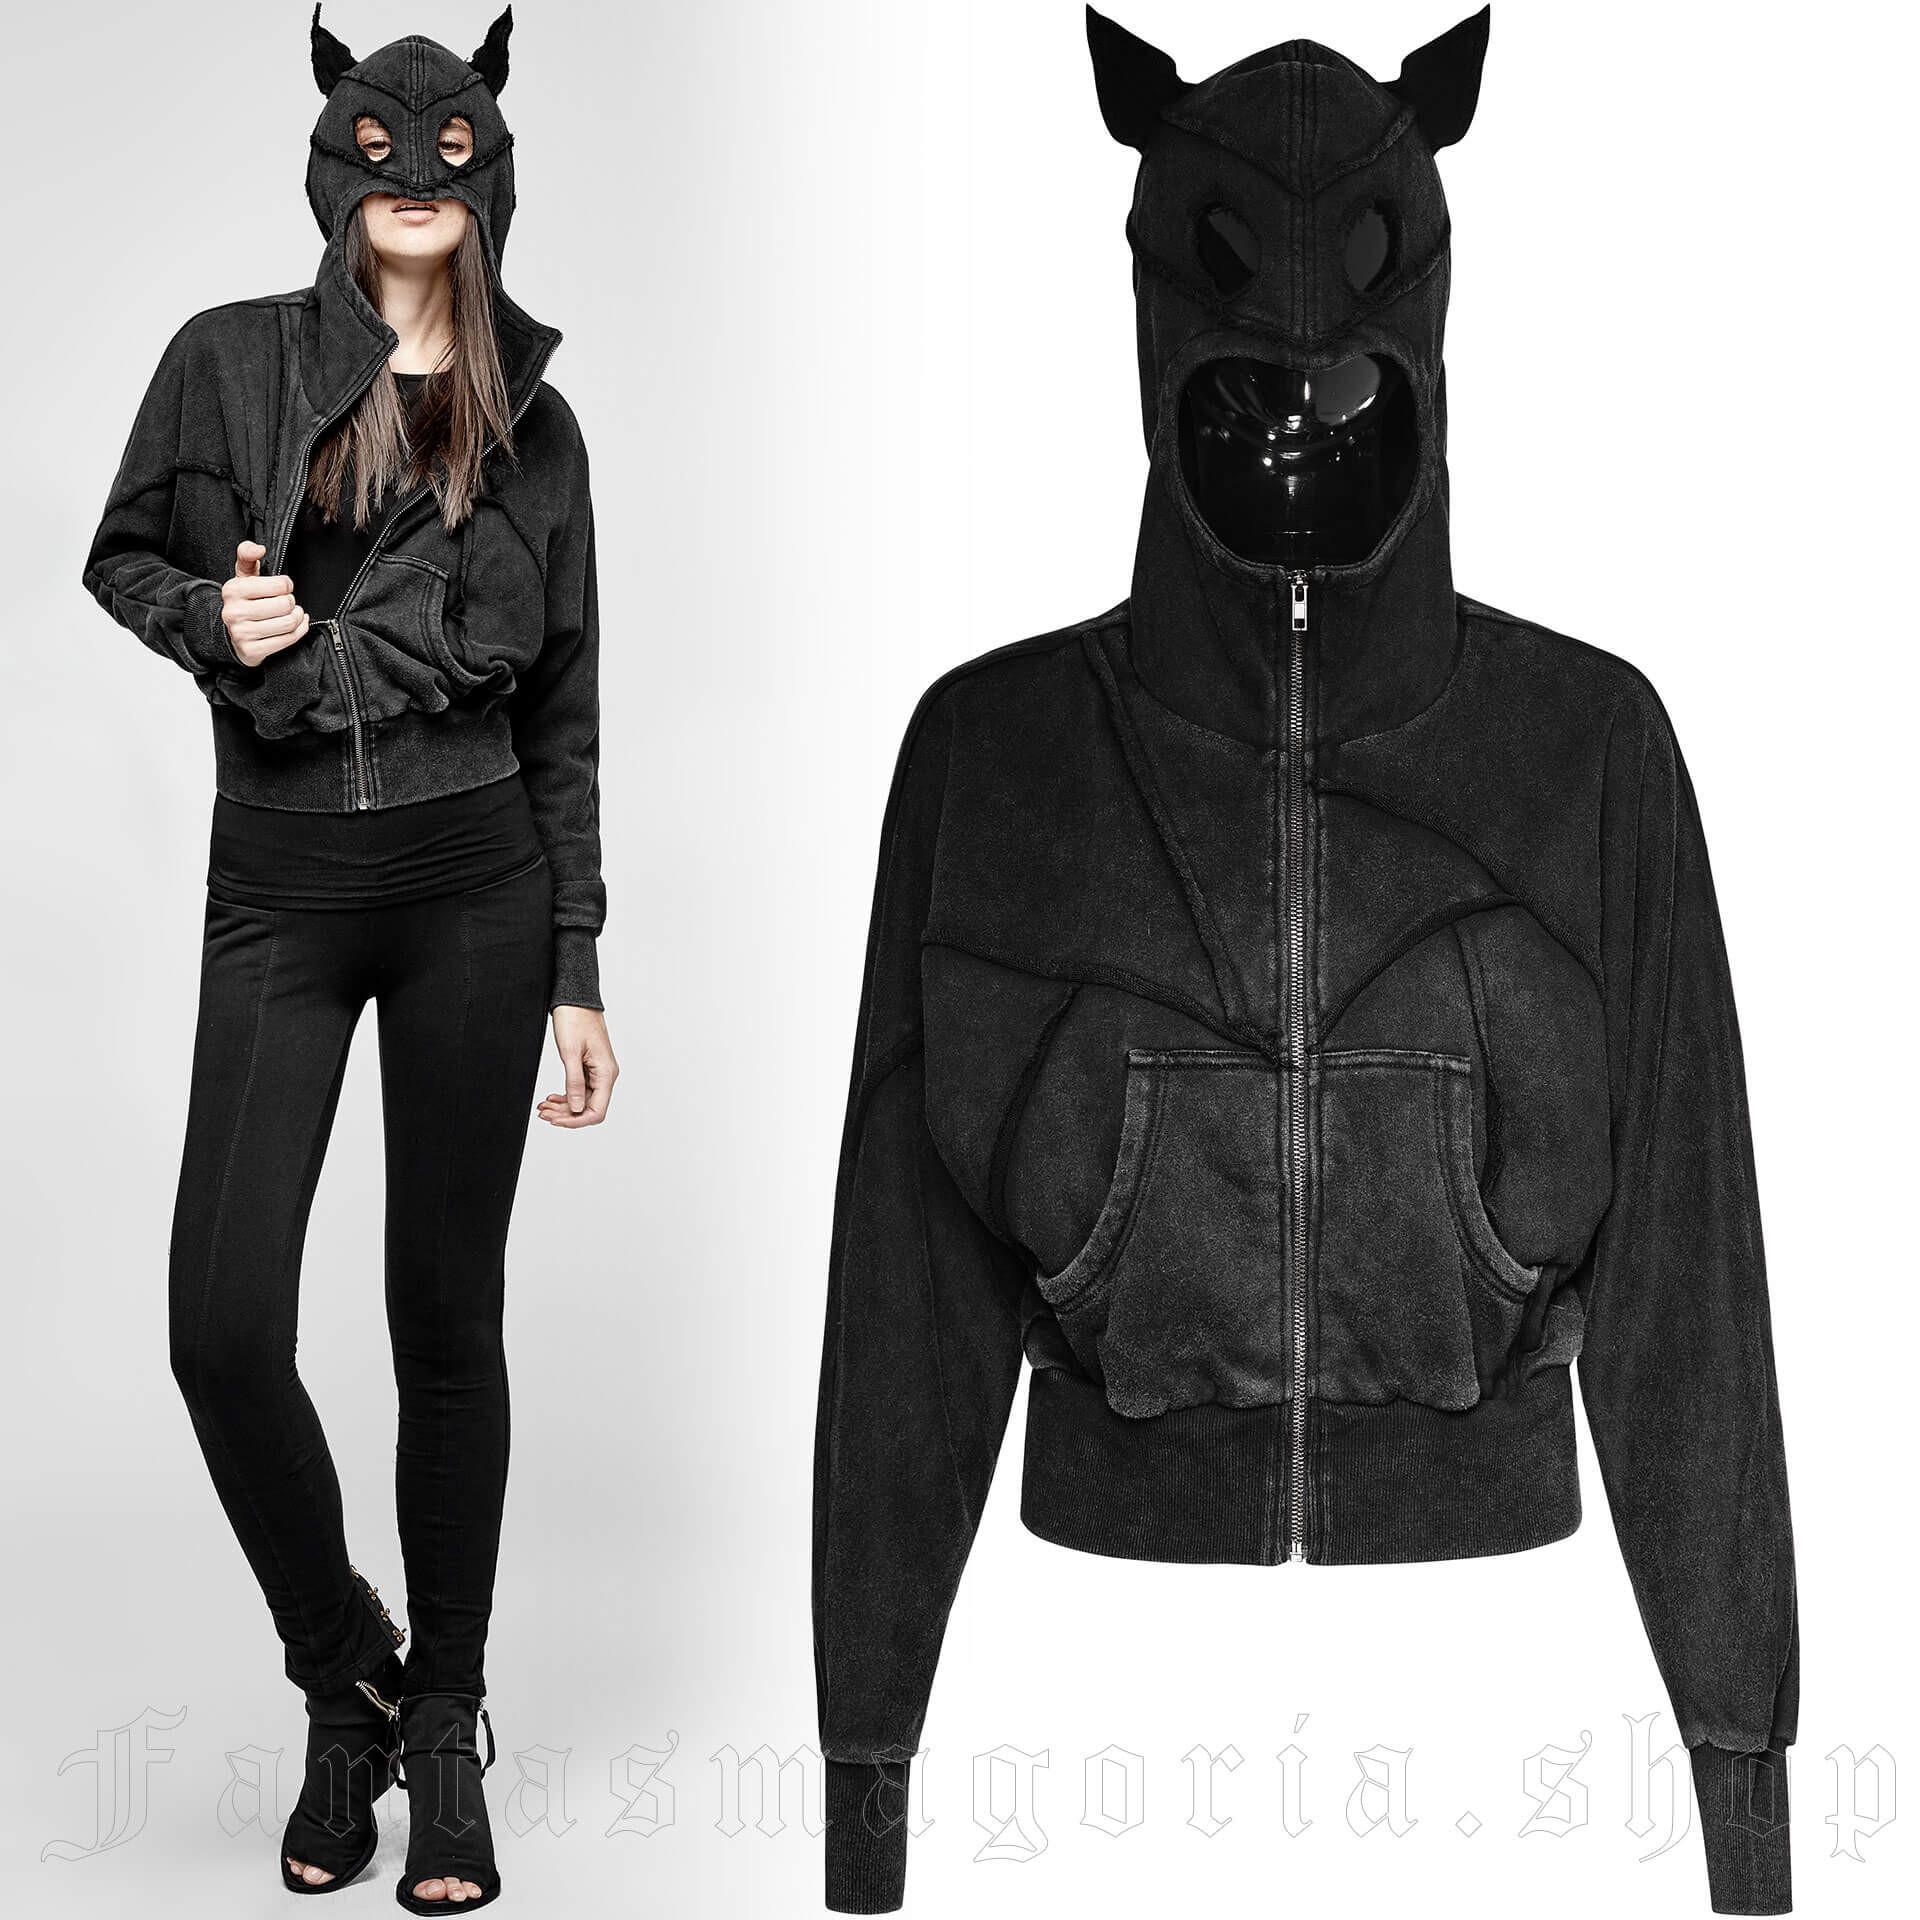 Catwoman Hoodie PY-208 by PUNK RAVE brand